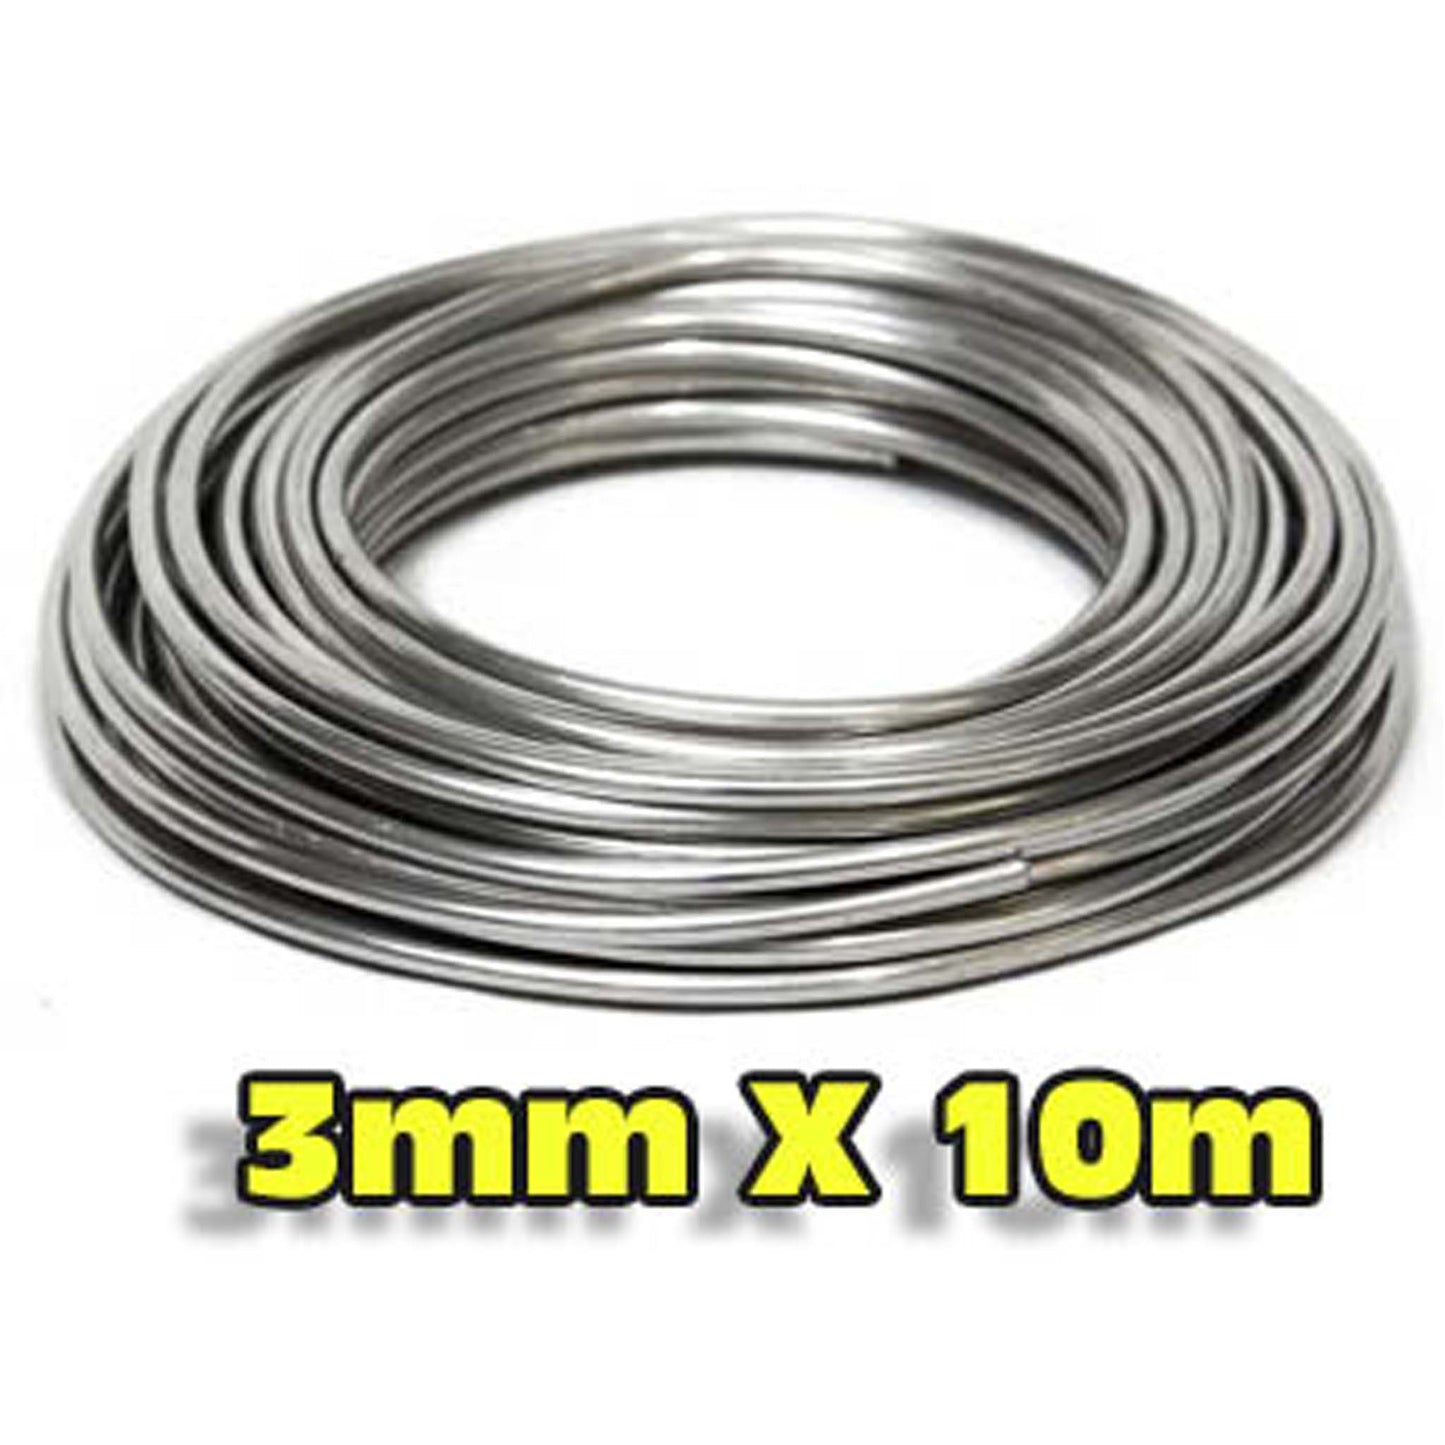 A 3mm by 10m spool of annealed aluminum craft wire for stop motion armatures.